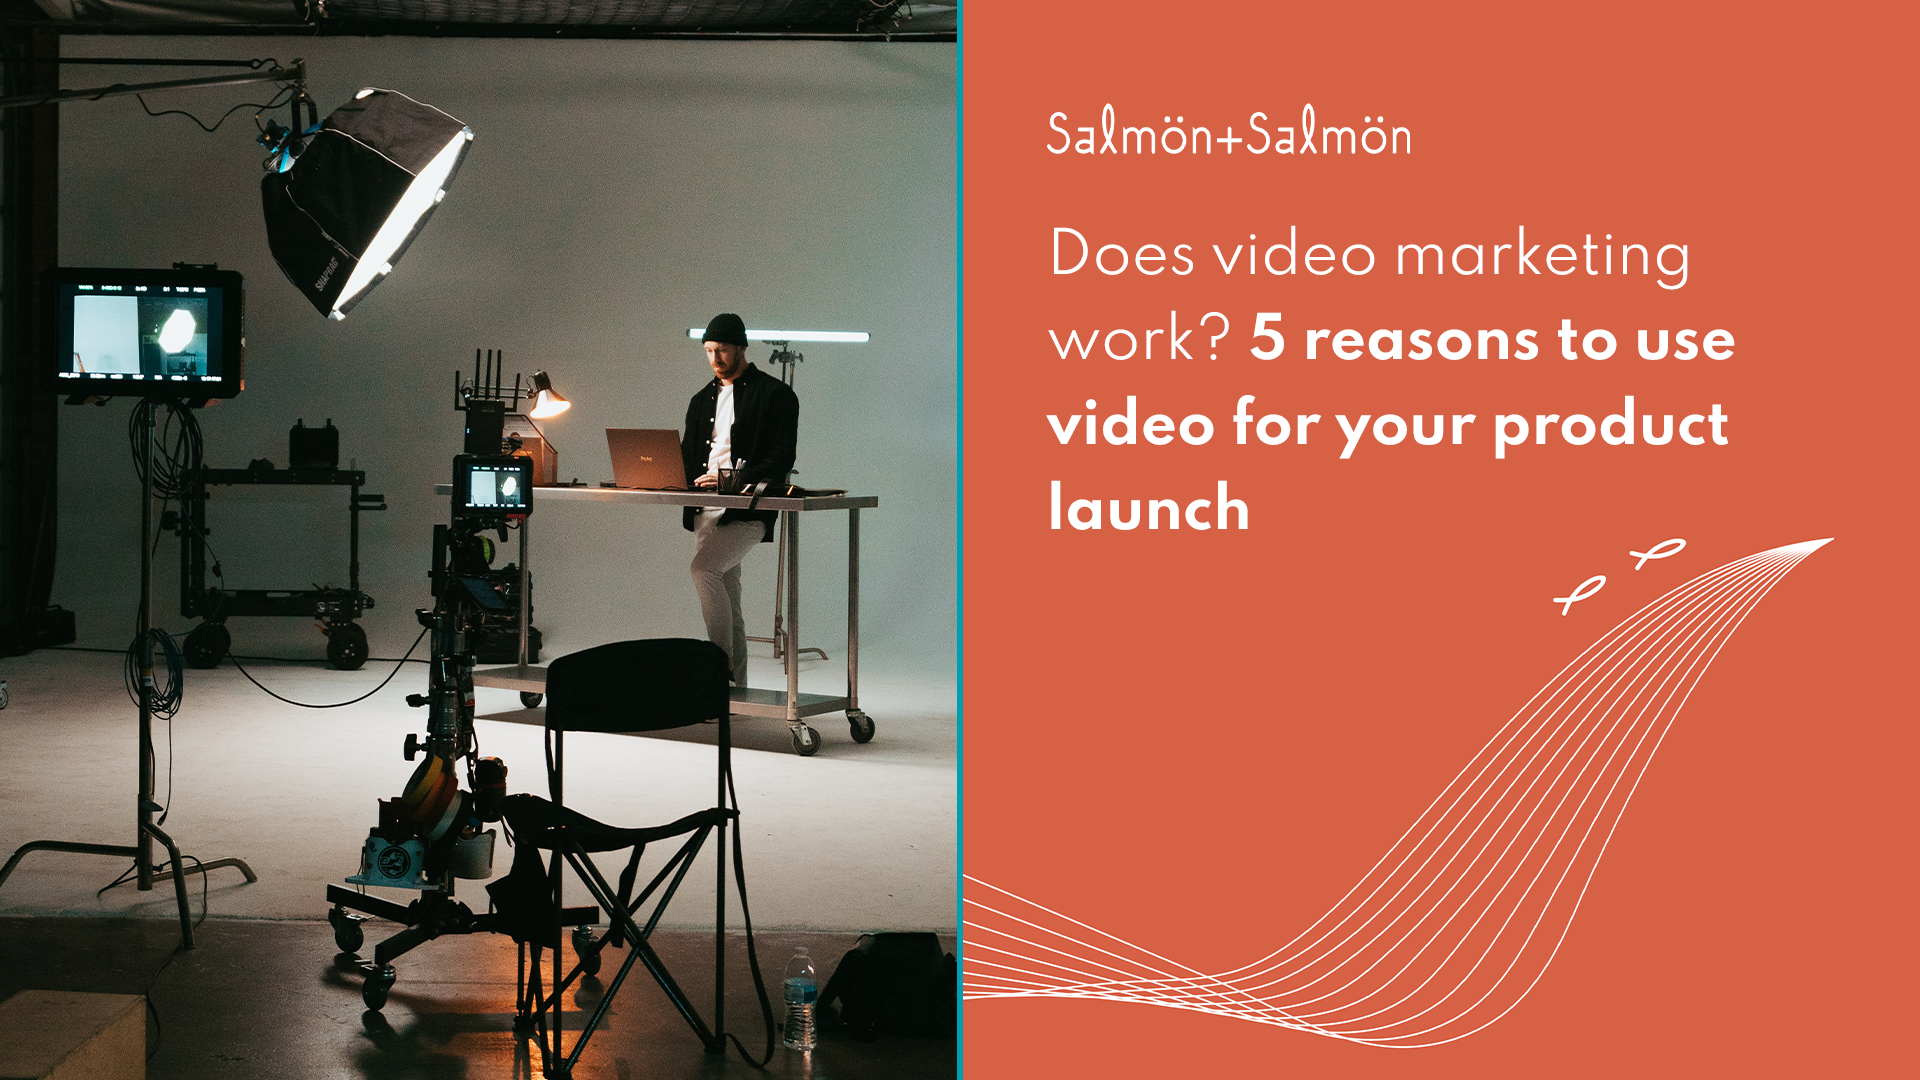 Video marketing for product launch